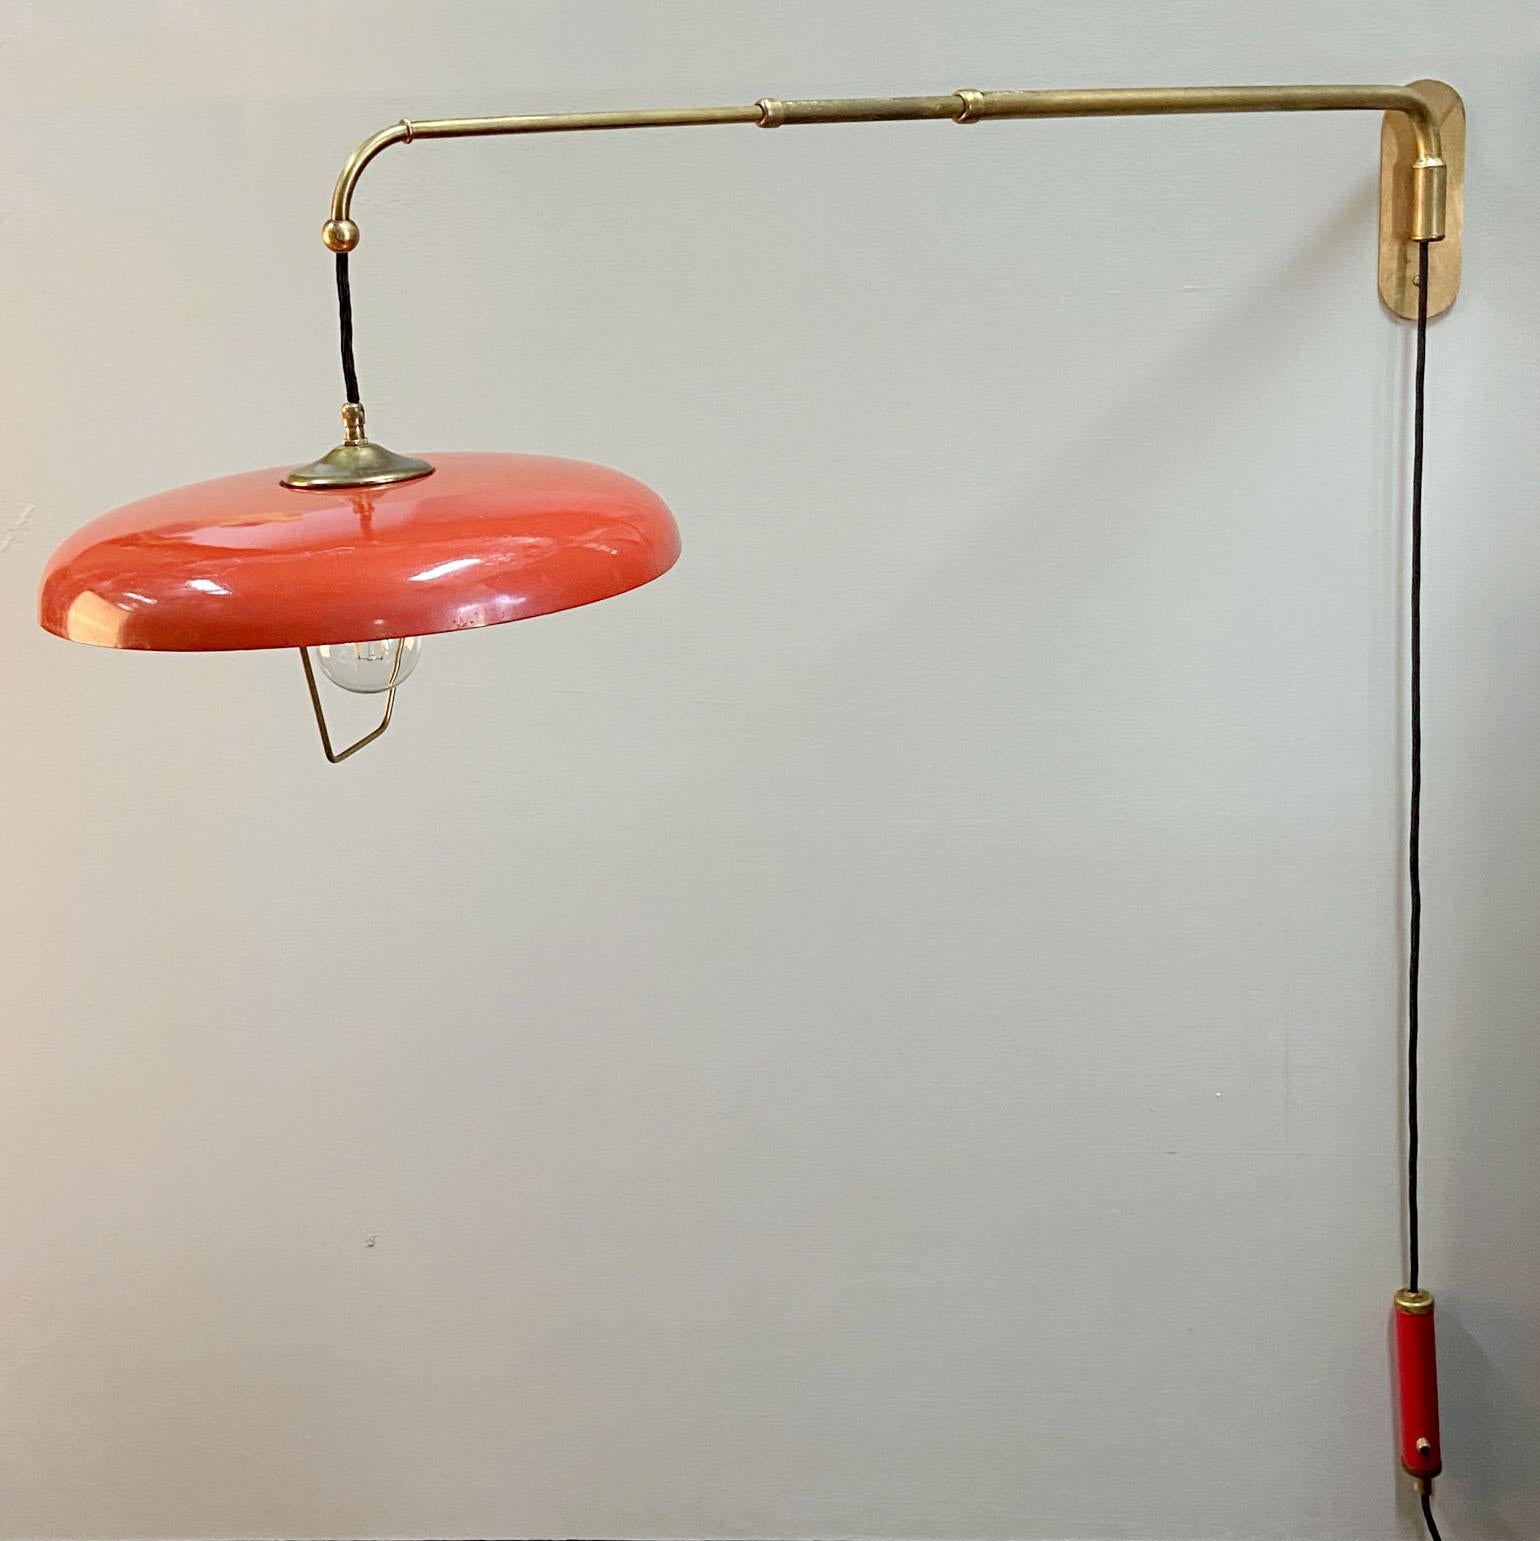 Original Mid-Century Modern 1950's telescoping adjustable wall mounted lamp with counterweight is attributed to Stilnovo. The lamp is fully adjustable. The tomato red metal shade is connected to a brass pole in 3 parts that allows to extended